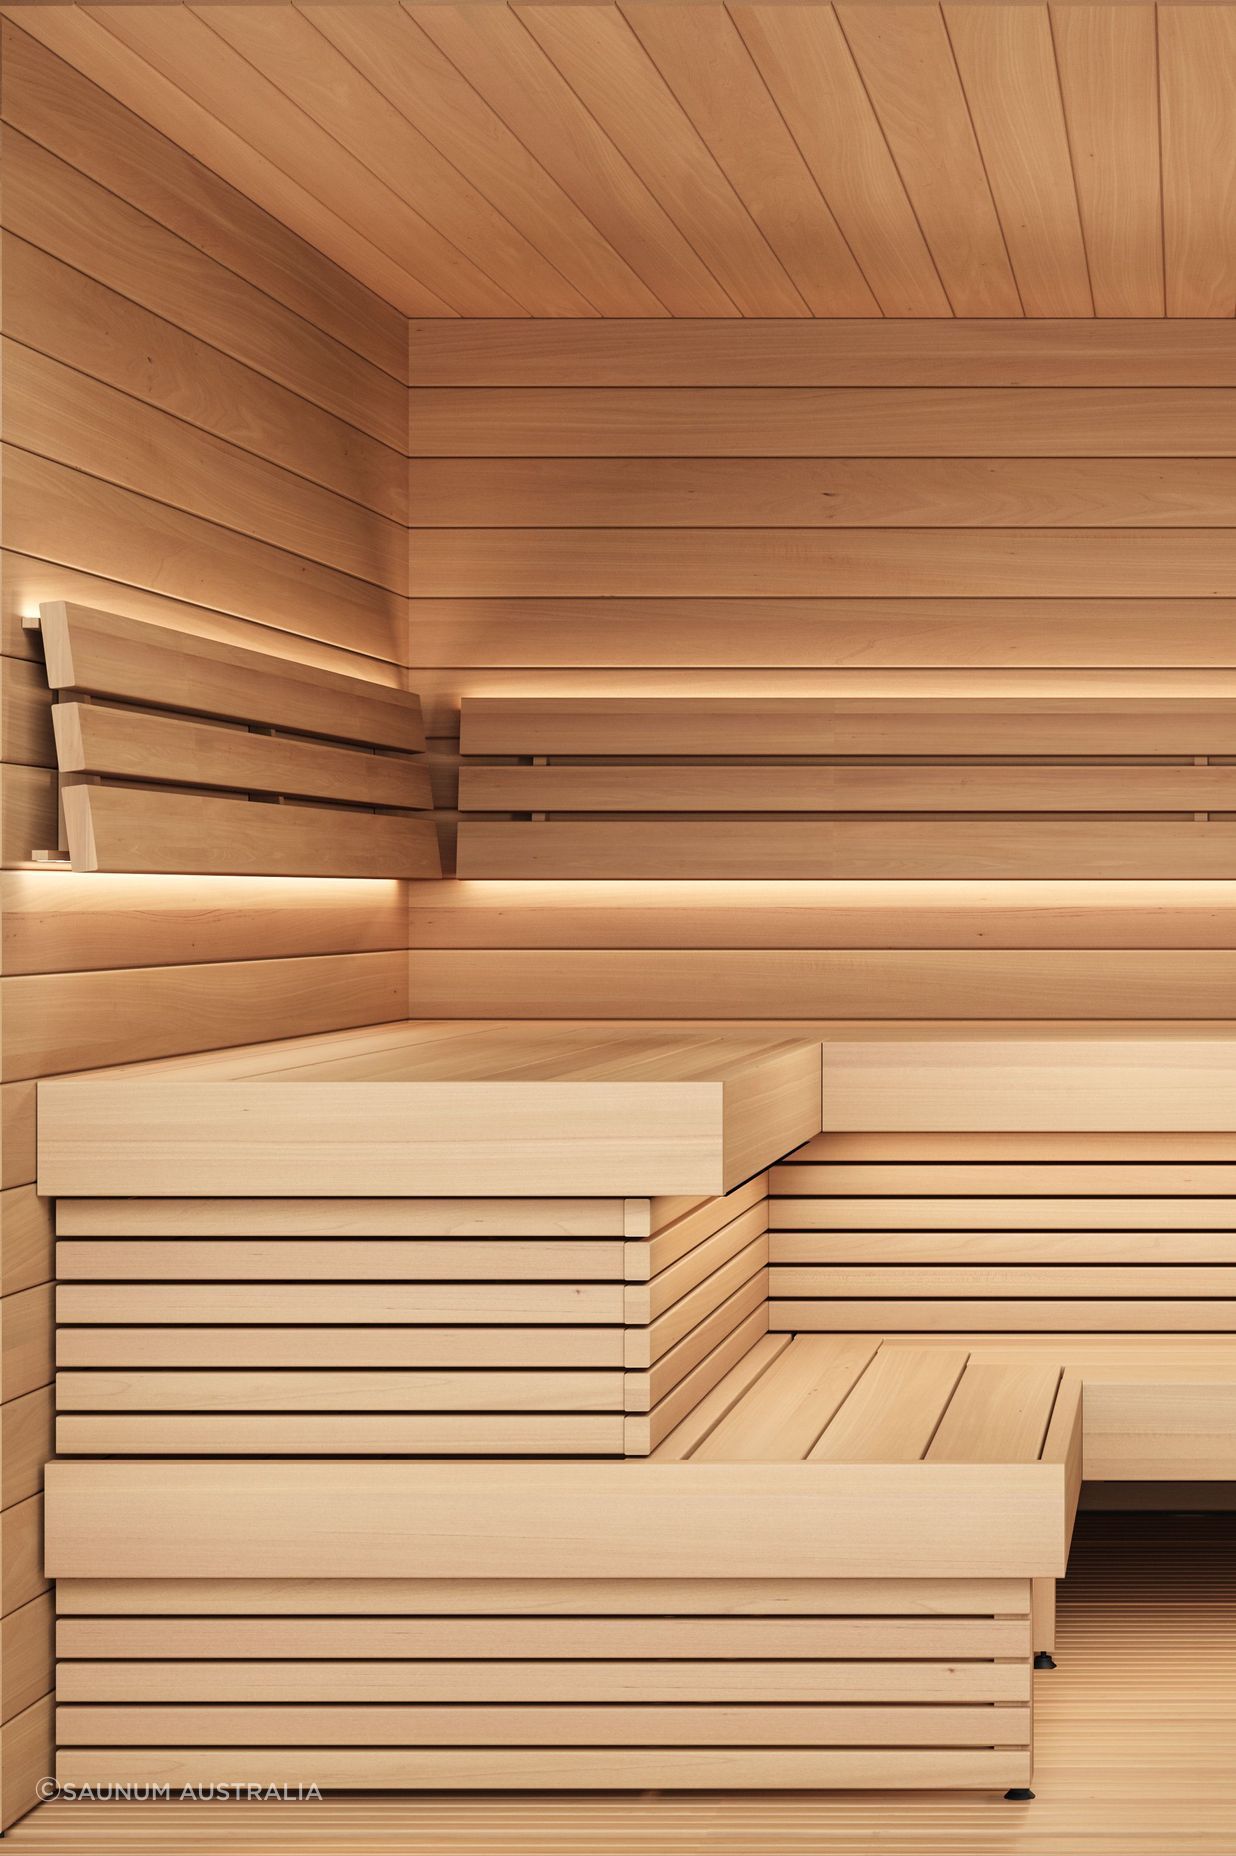 Sauna interiors are available in either alder or thermo-treated aspen, both hypoallergenic for a sauna environment that is gentle on the senses.